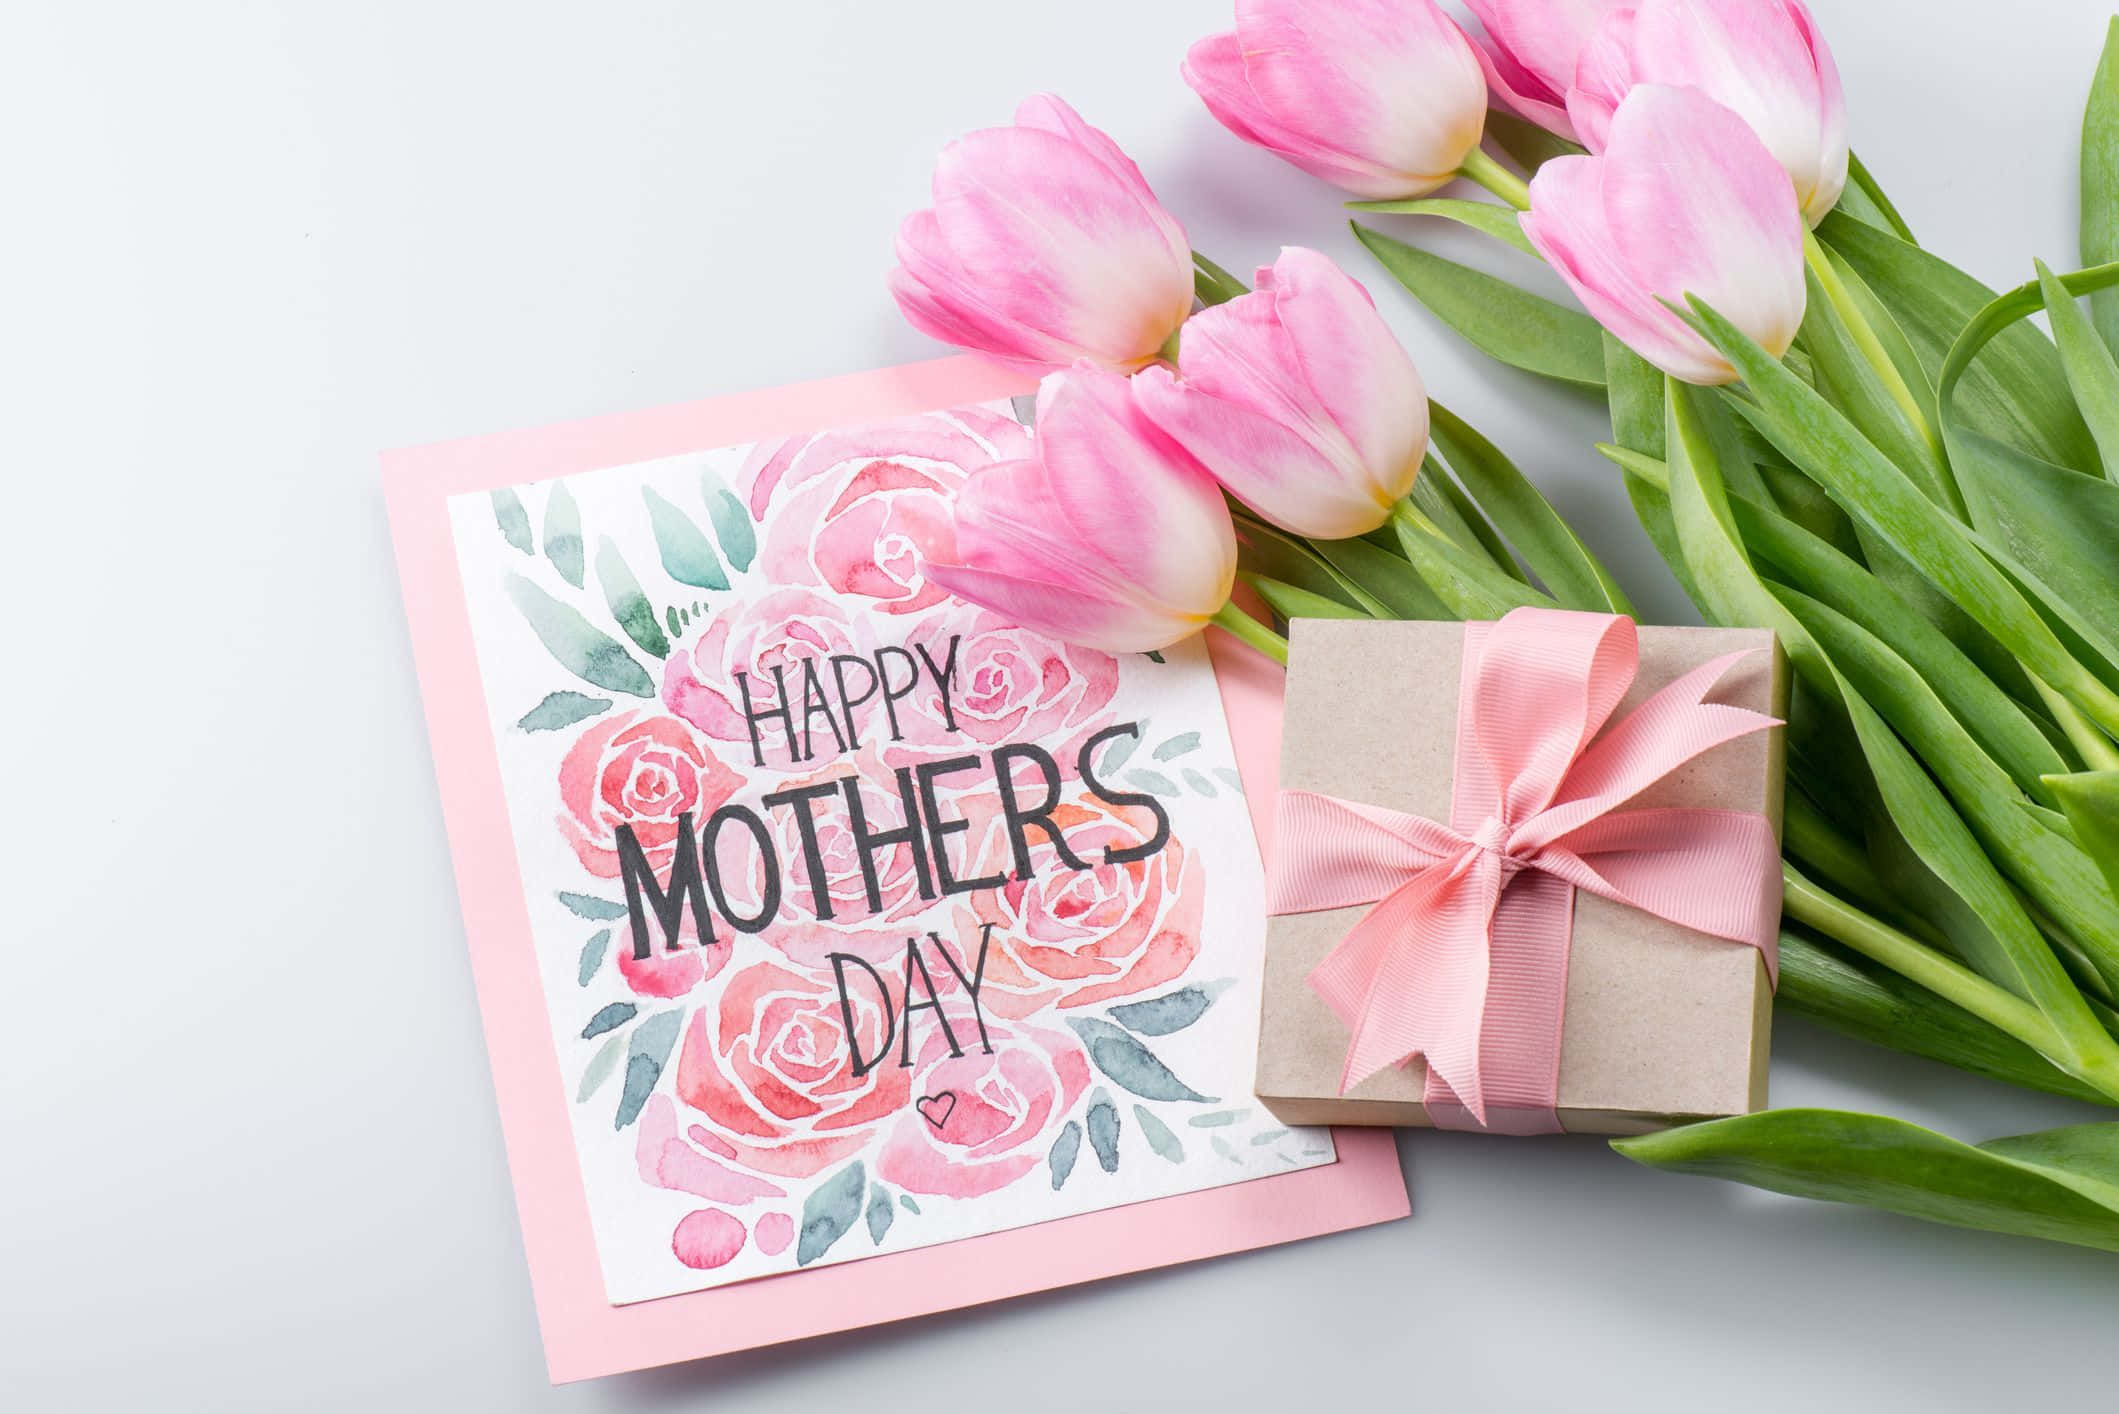 A beautiful gift for mom – a day filled with love and appreciation!